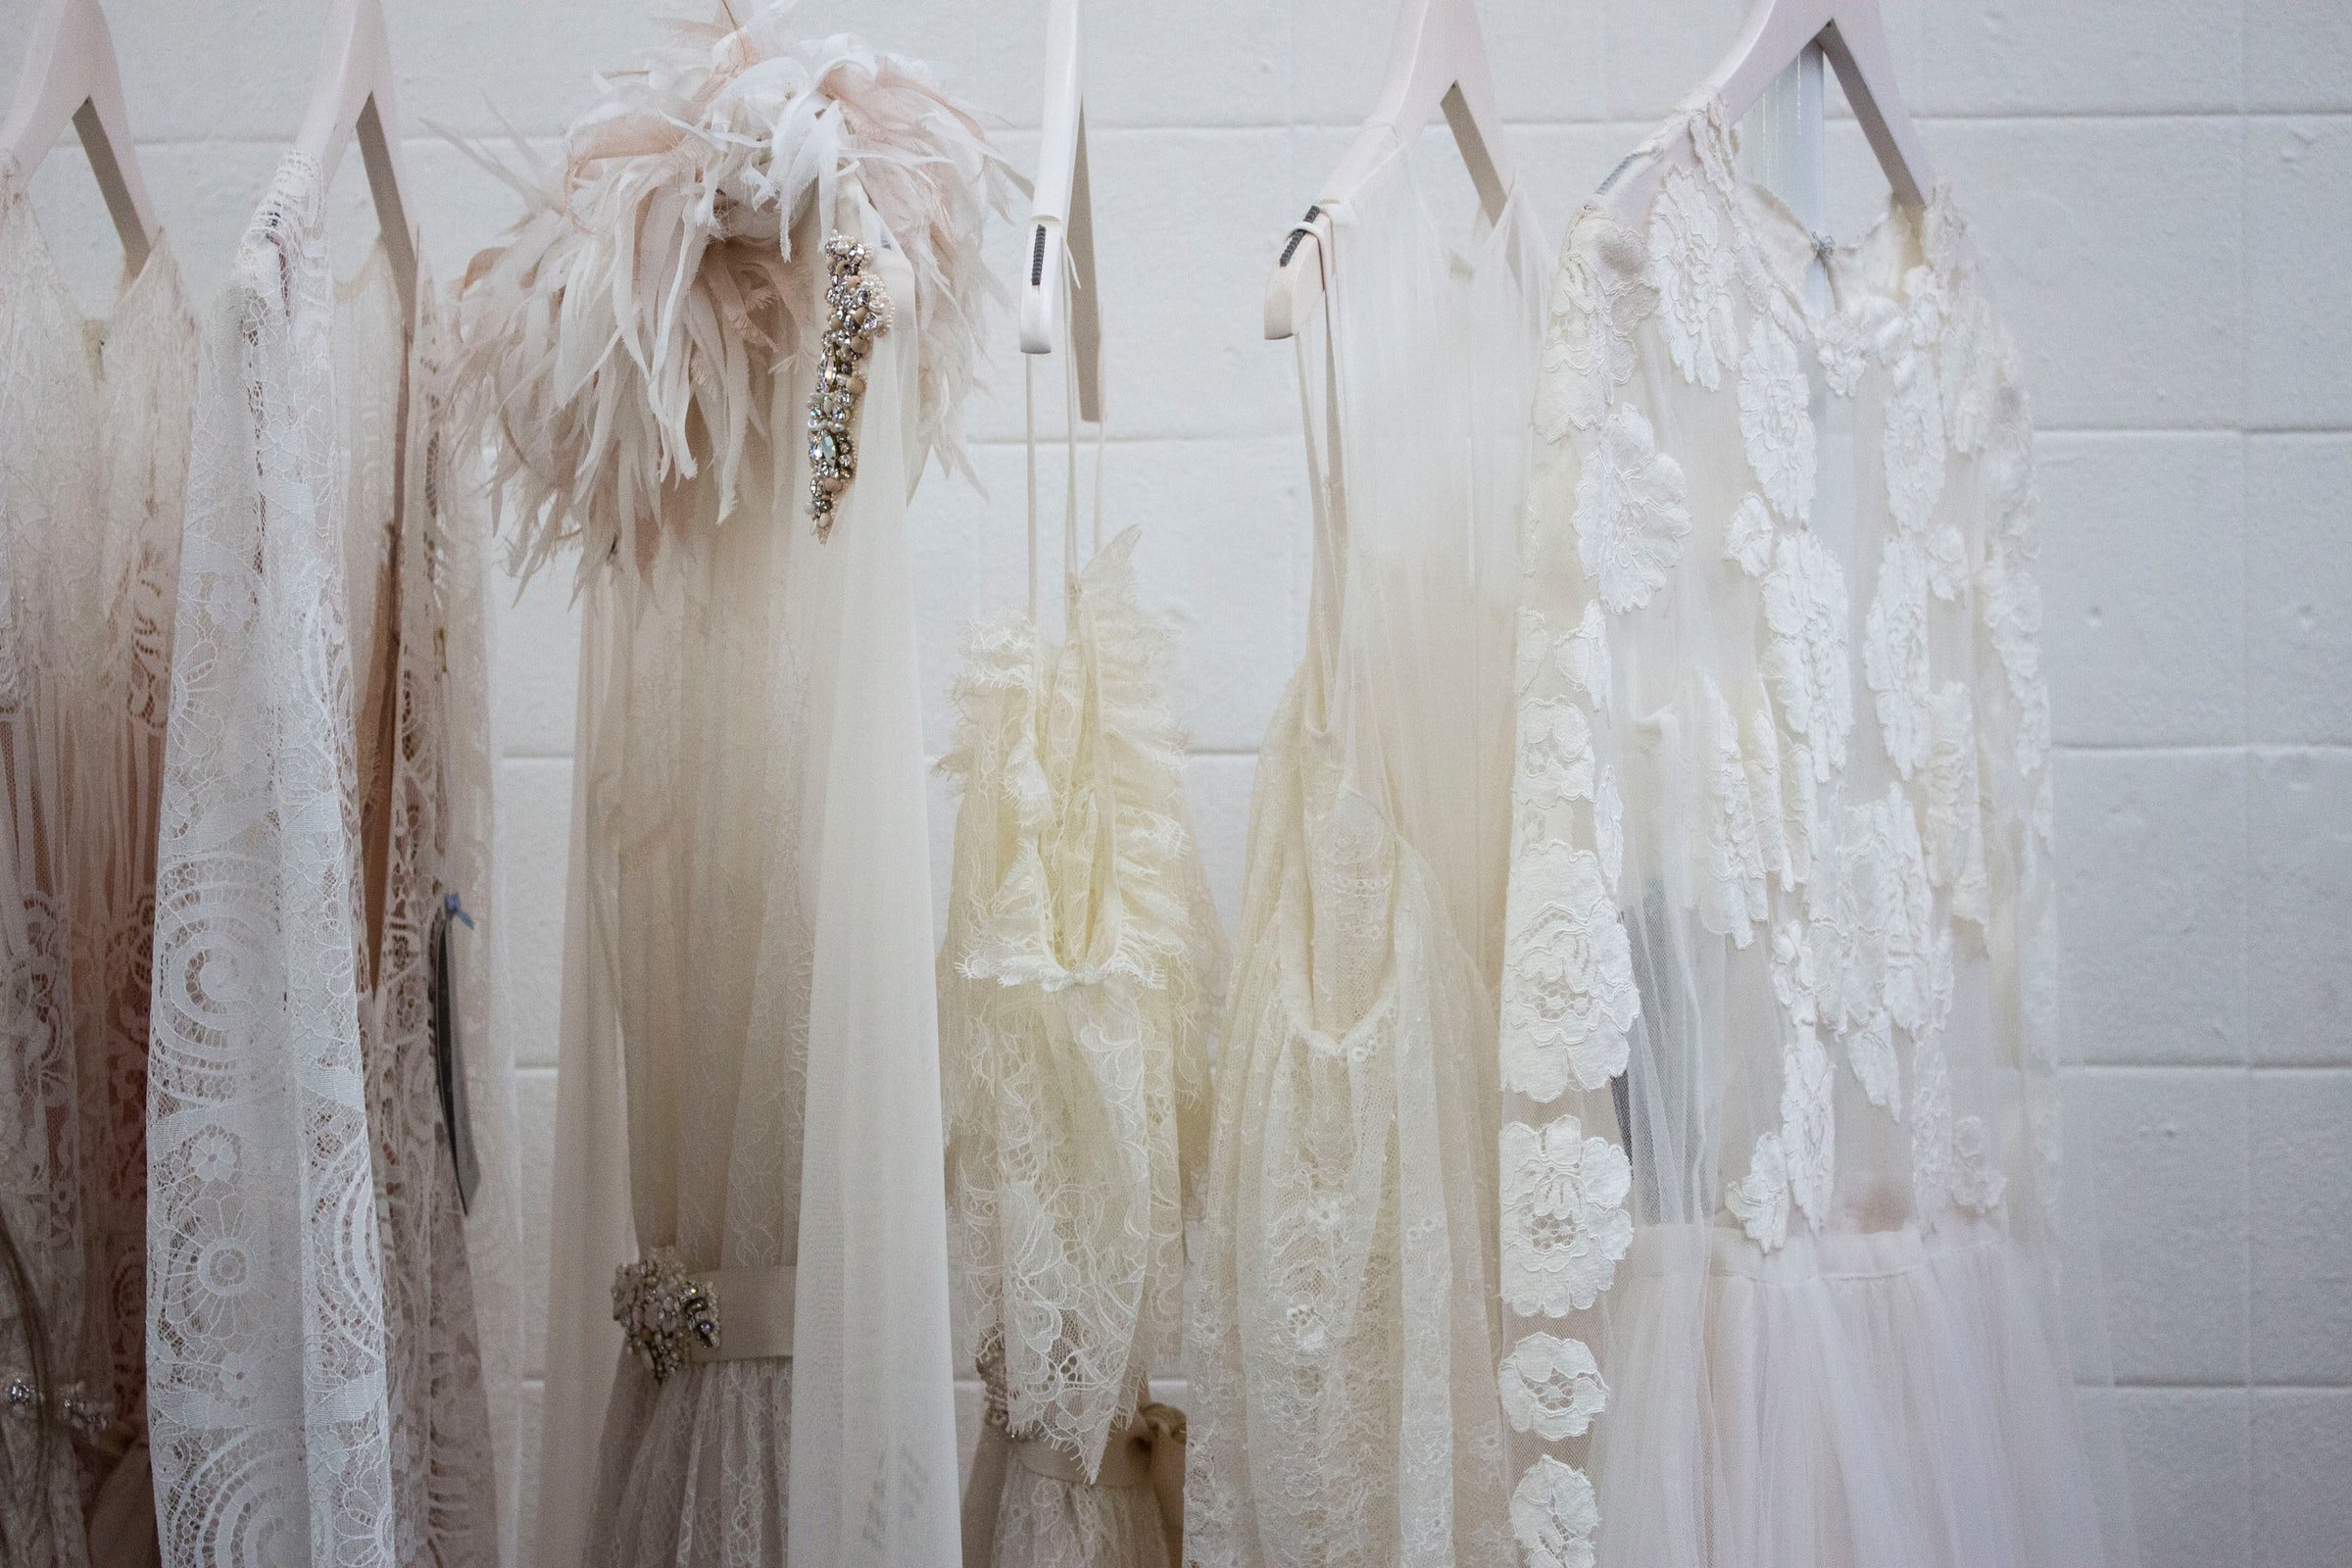 White dresses hanging on a stand. | Source: Unsplash